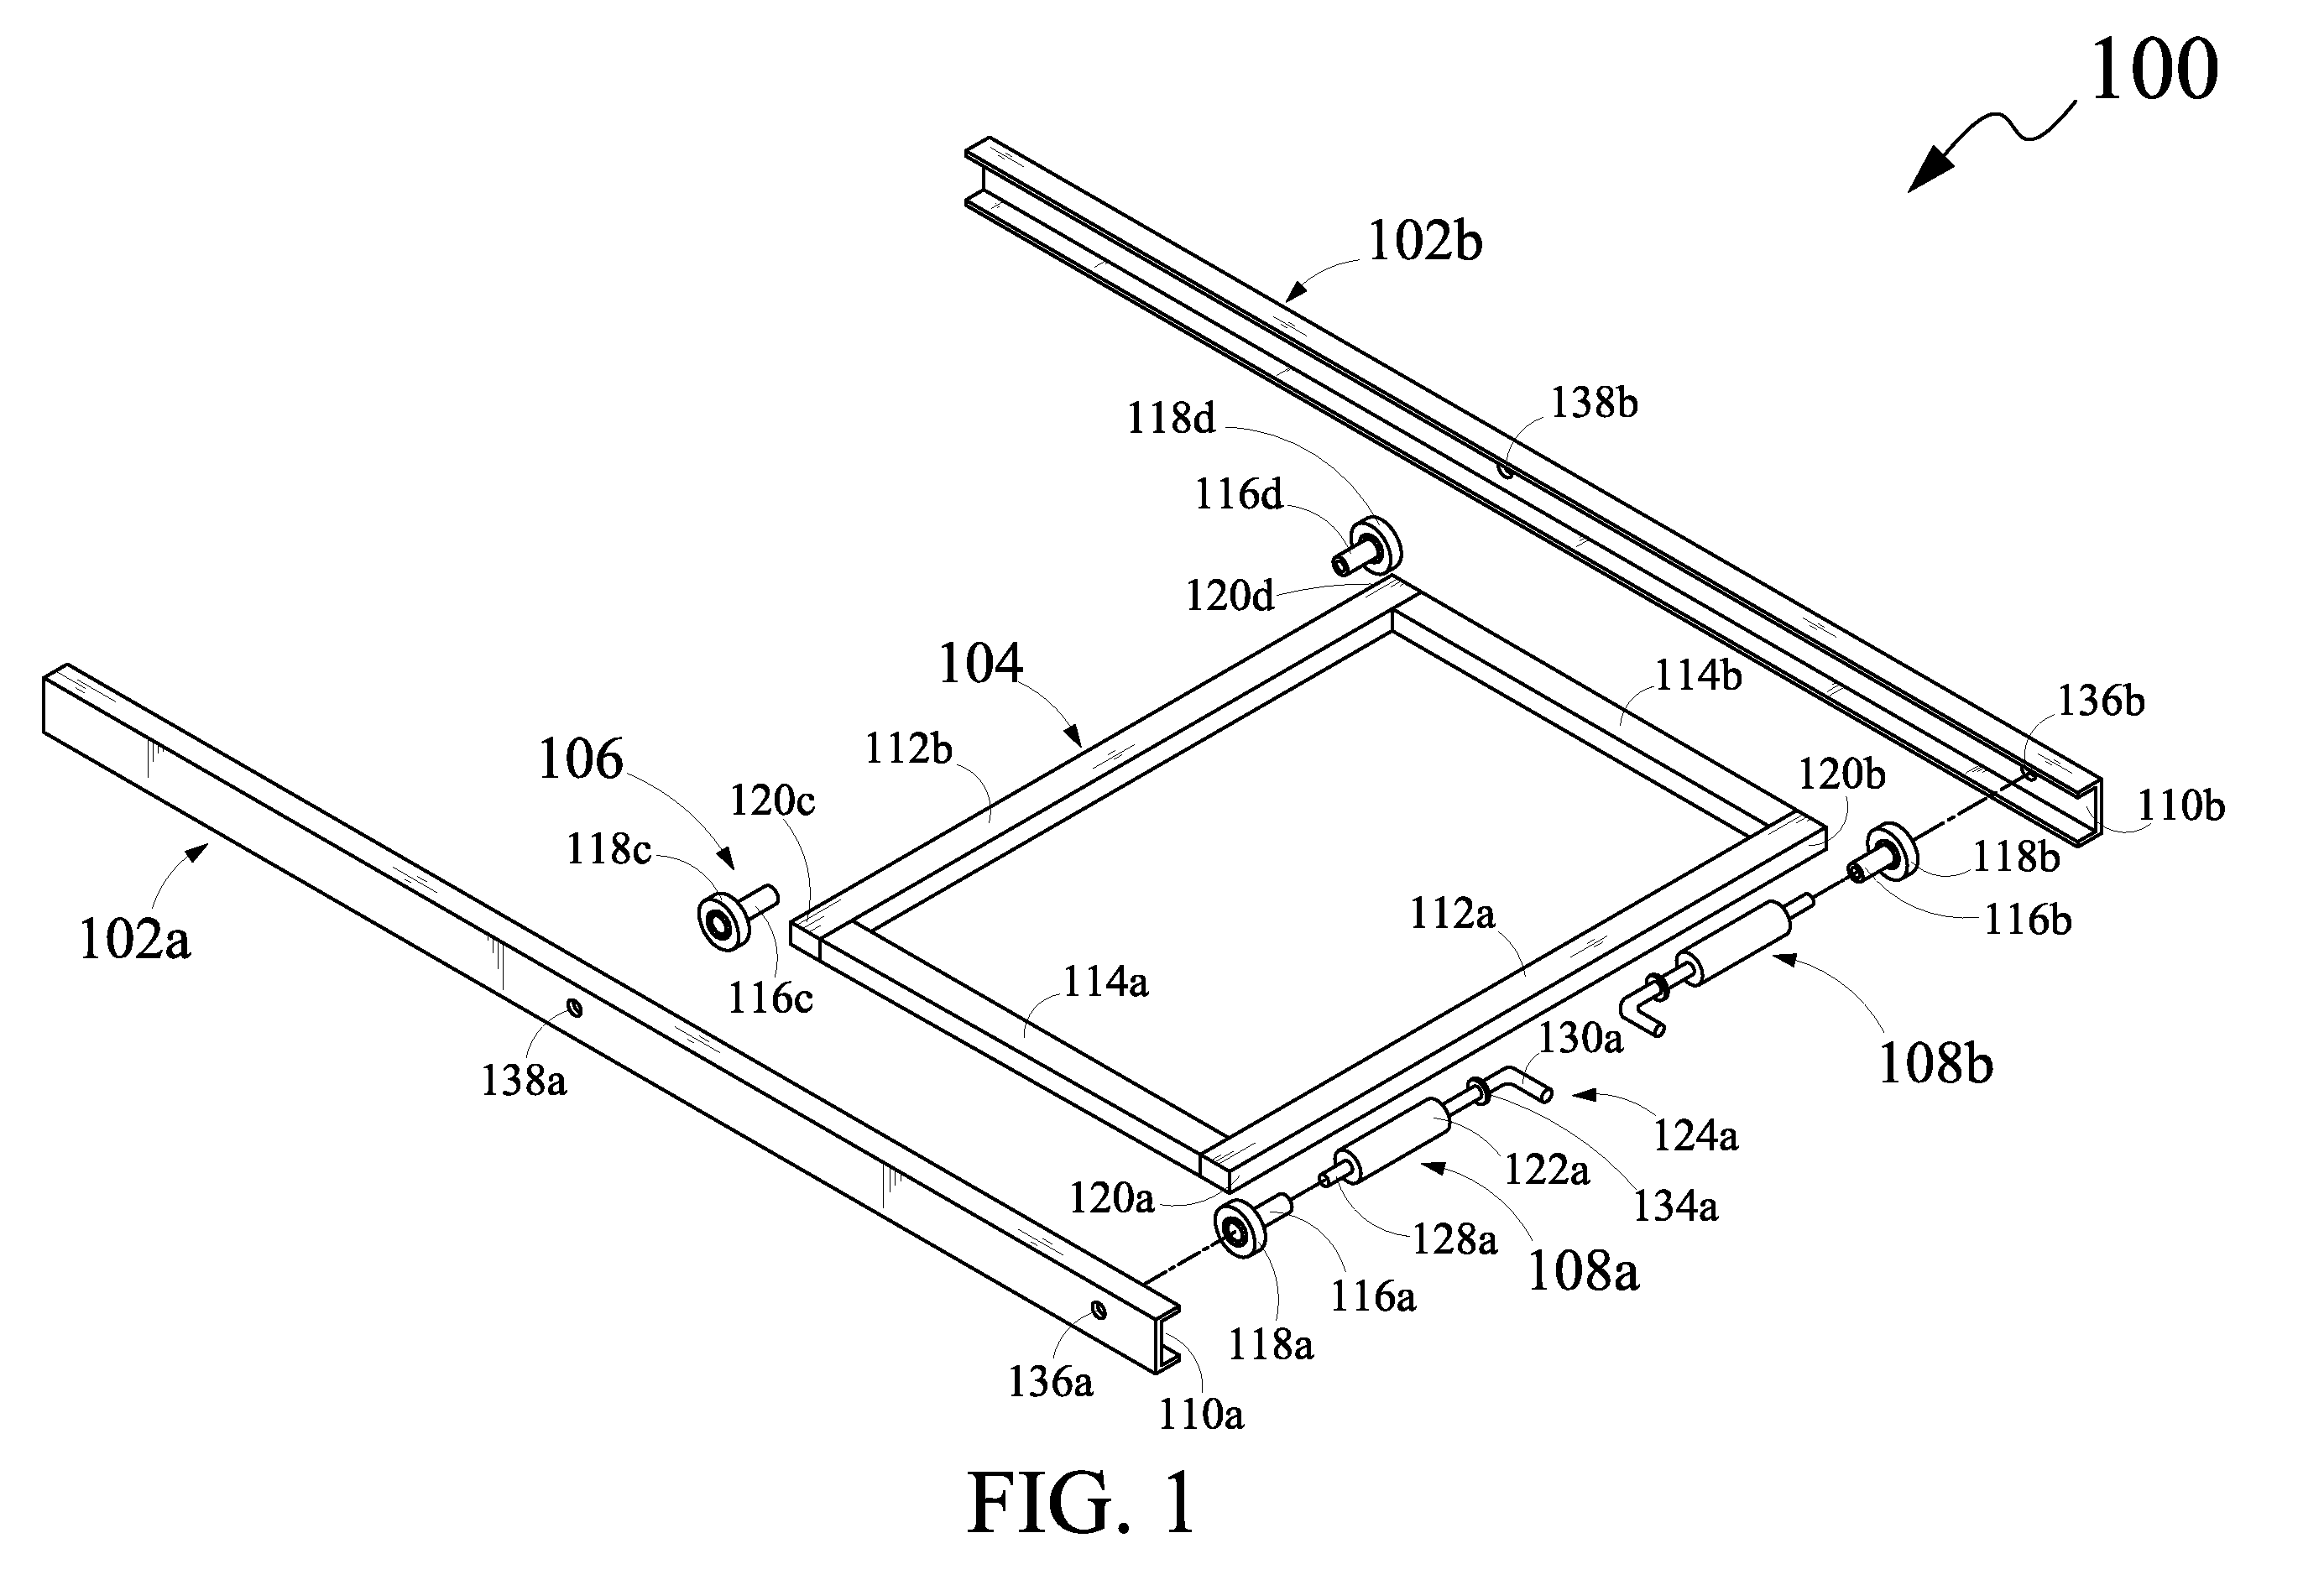 Load handling apparatus for cargo vehicle